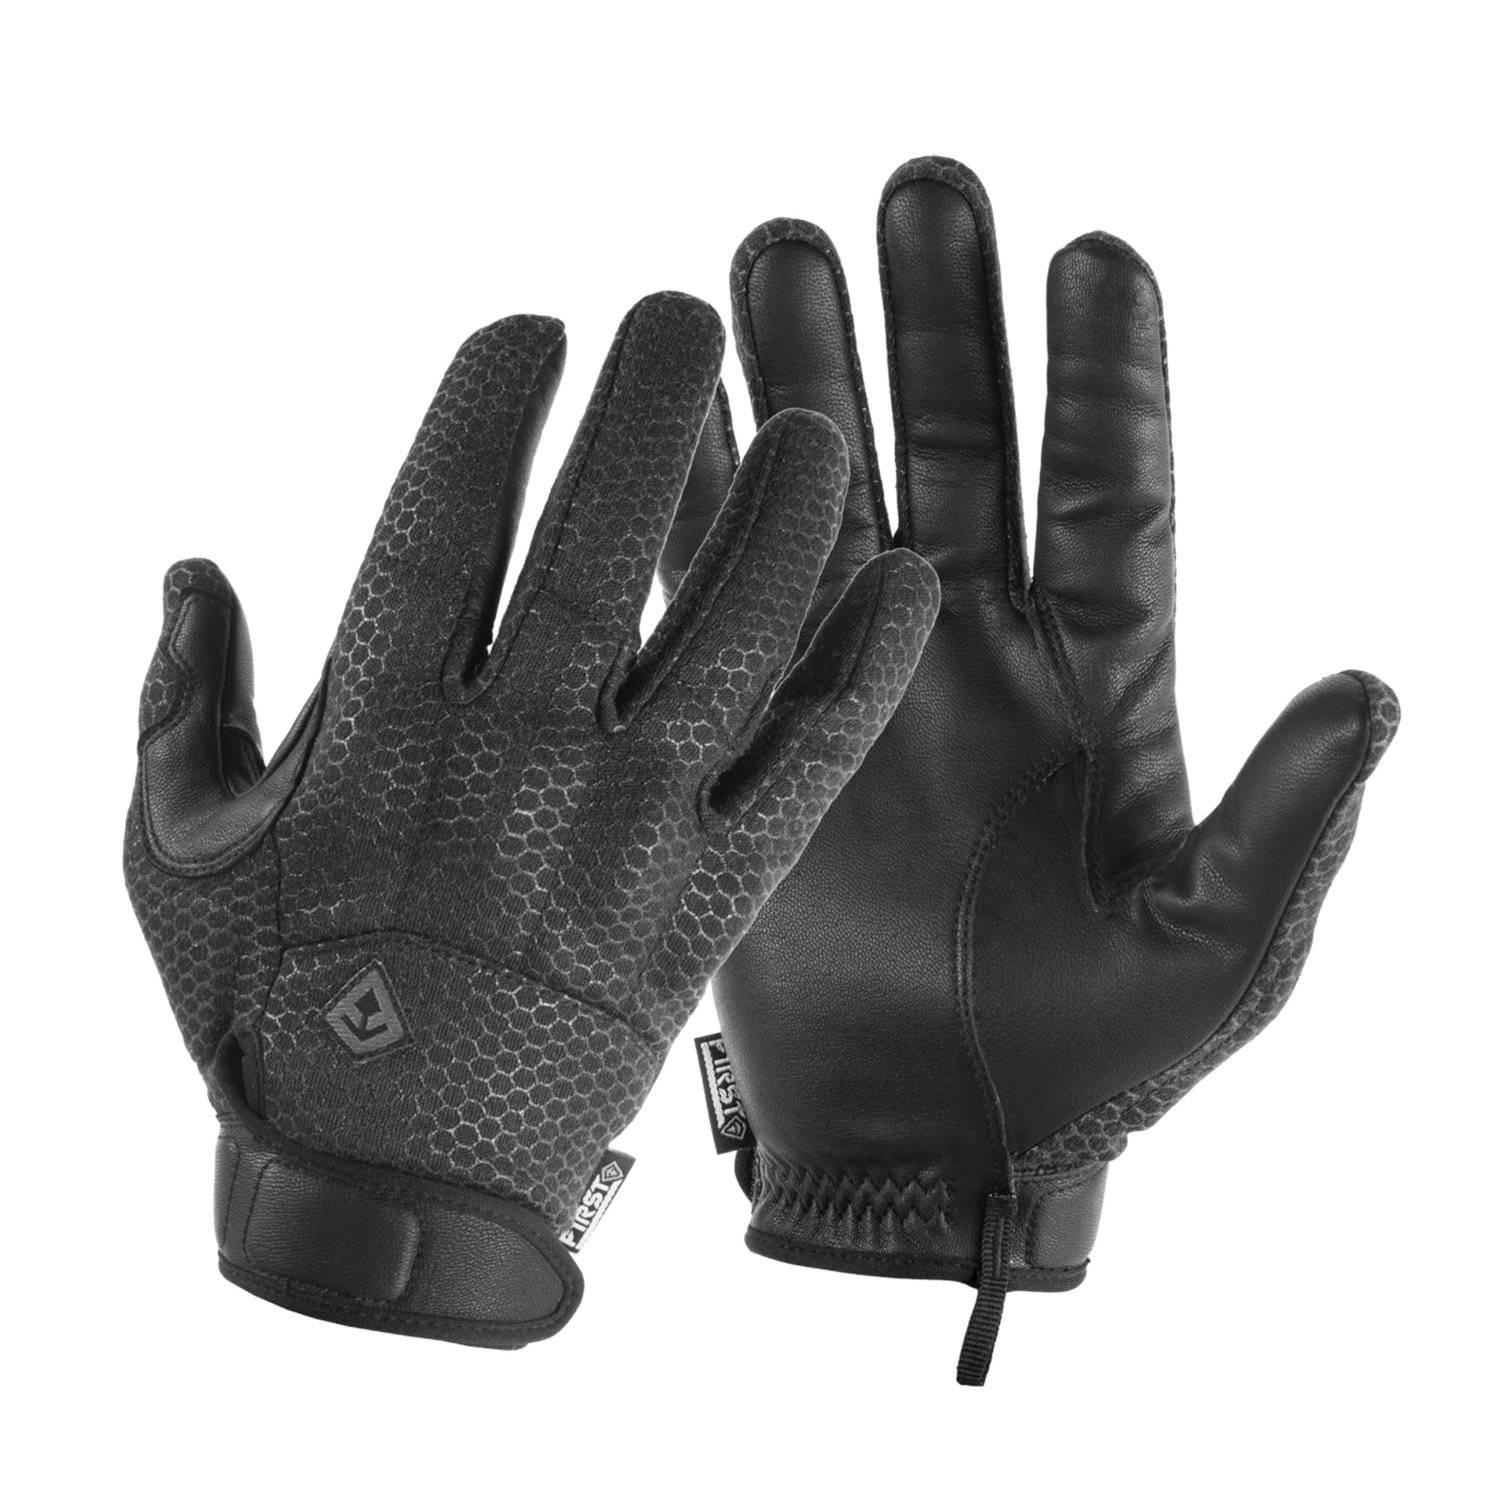 XX-Large, Black Tactical Police Kevlar Hard Knuckles Military Touchscreen Patrol Duty Search Duty Gloves 